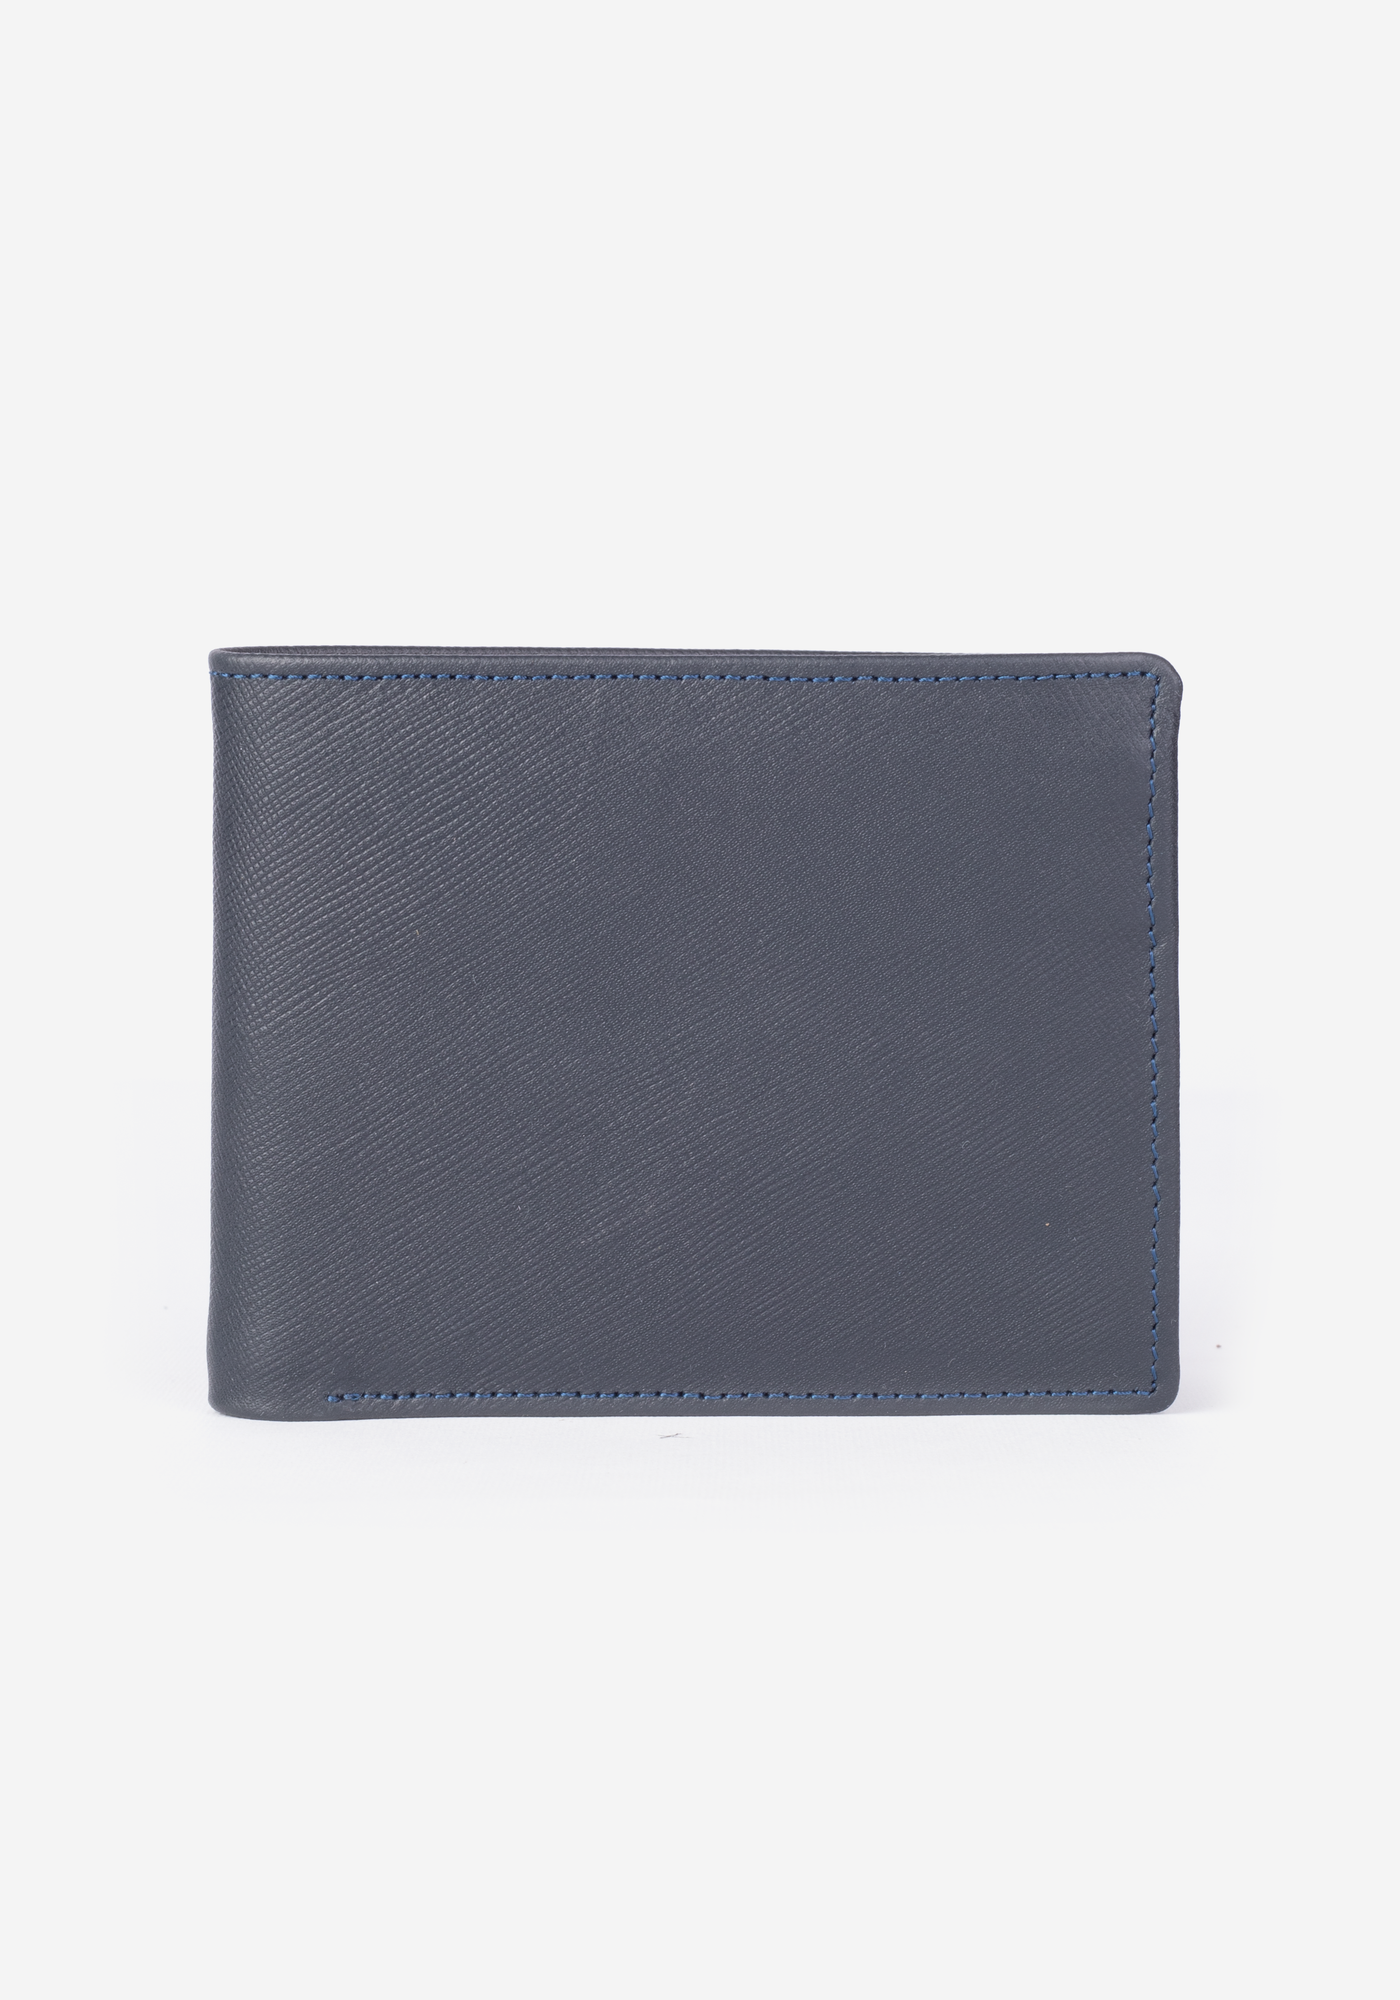 WAL035 / Navy Leather Wallet